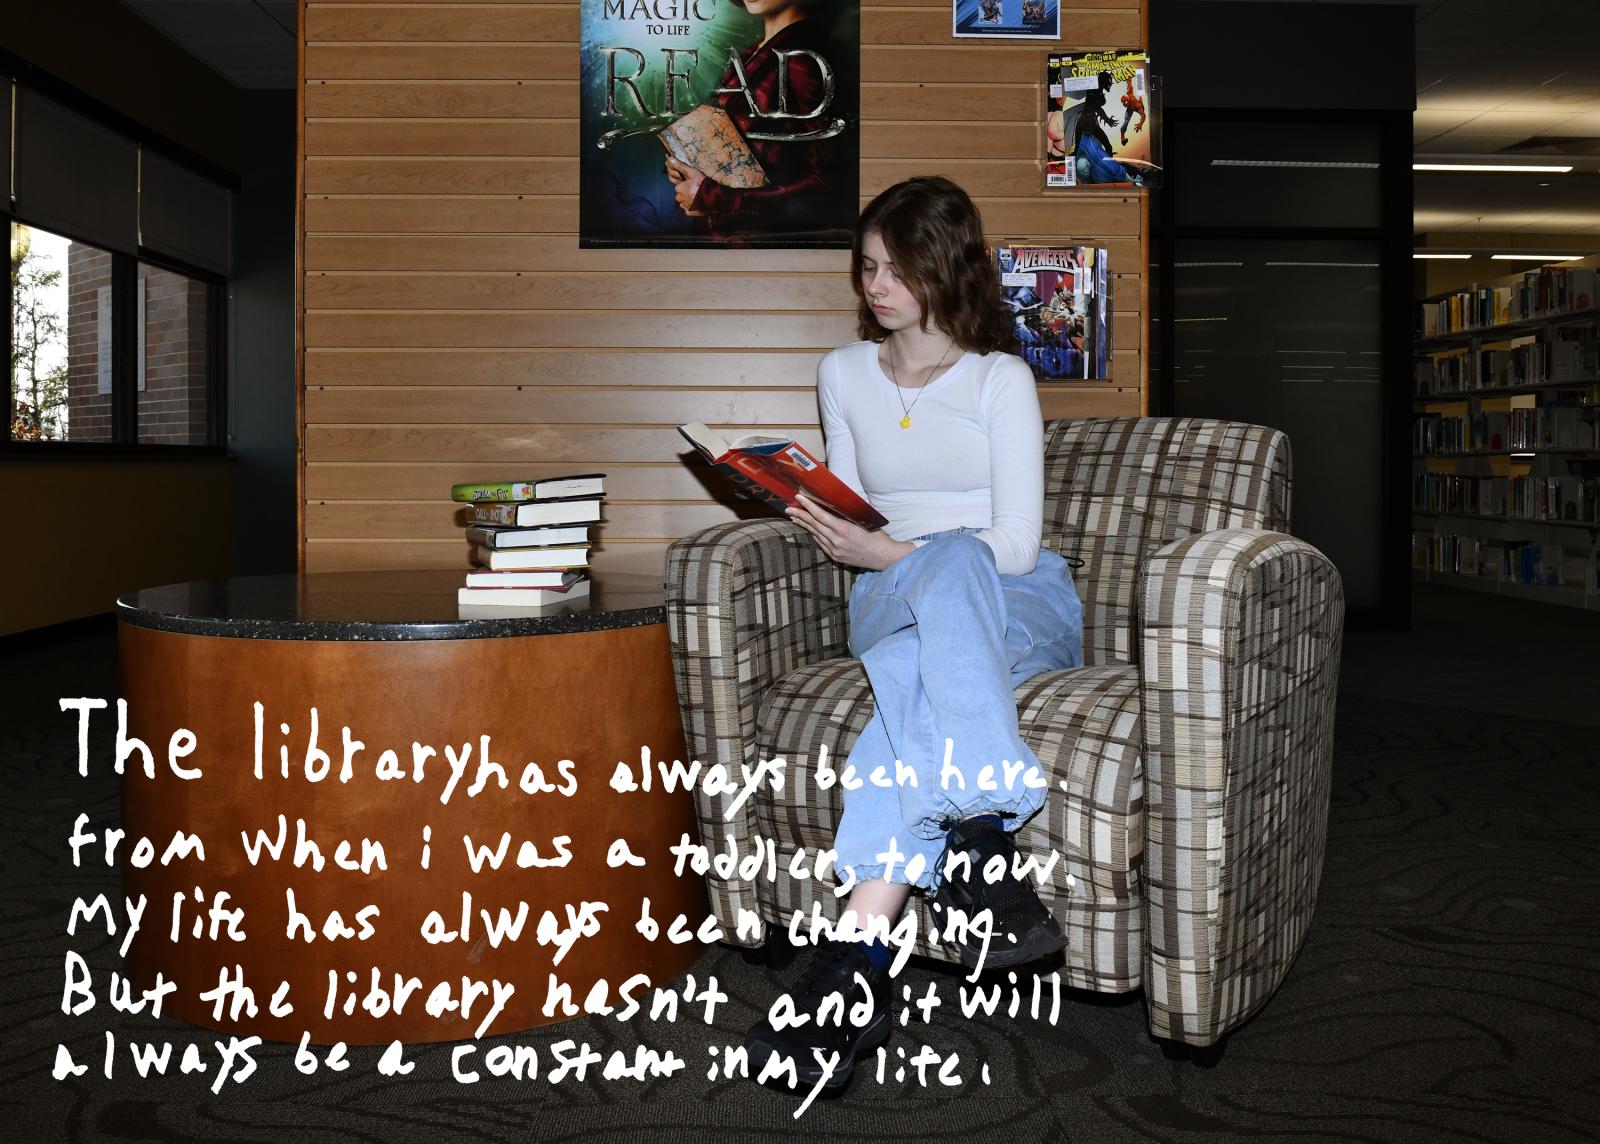 Heidi Stahl has used the librar...constant in my life.&rdquo;